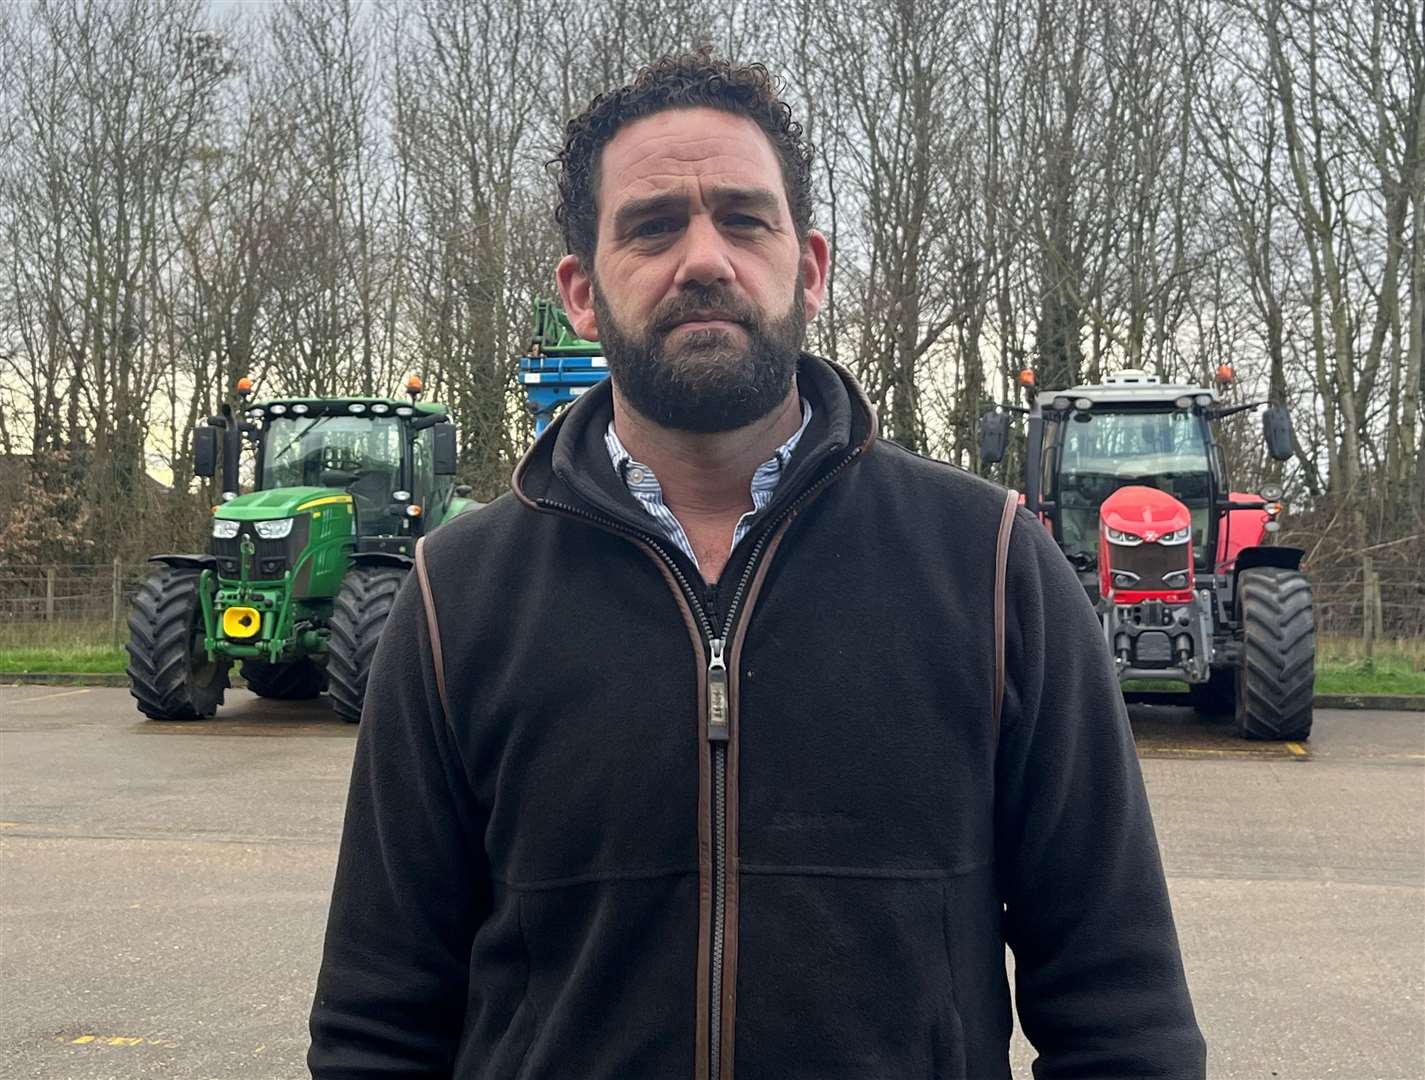 Andrew Gibson, 42, is a fifth-generation farmer from Wingham